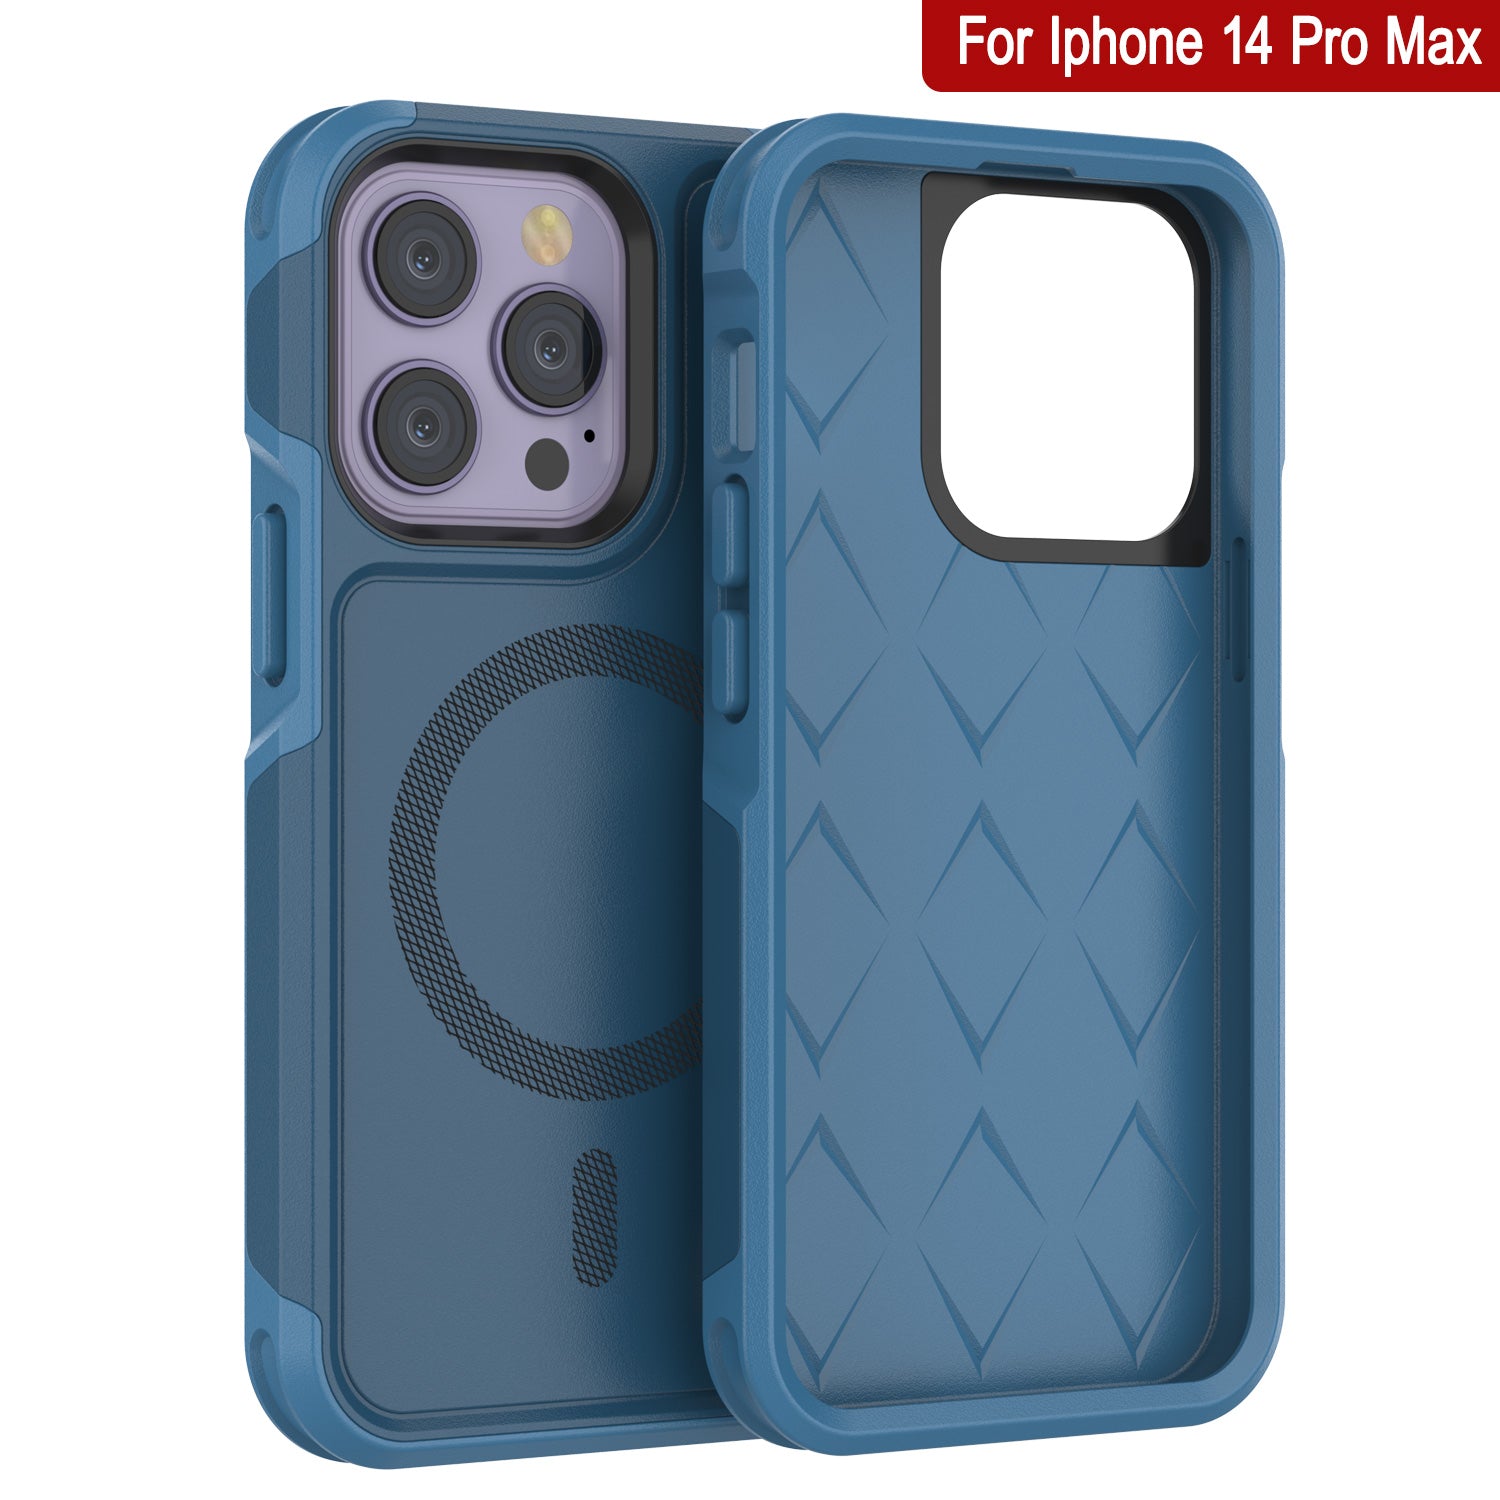 Case for iPhone 14 Pro Max Case,Flag Fishing Case for iPhone 14 Pro Max  Design for Men Boys [Anti-Scratch] Non-Slip+Shockproof Rugged TPU  Protective